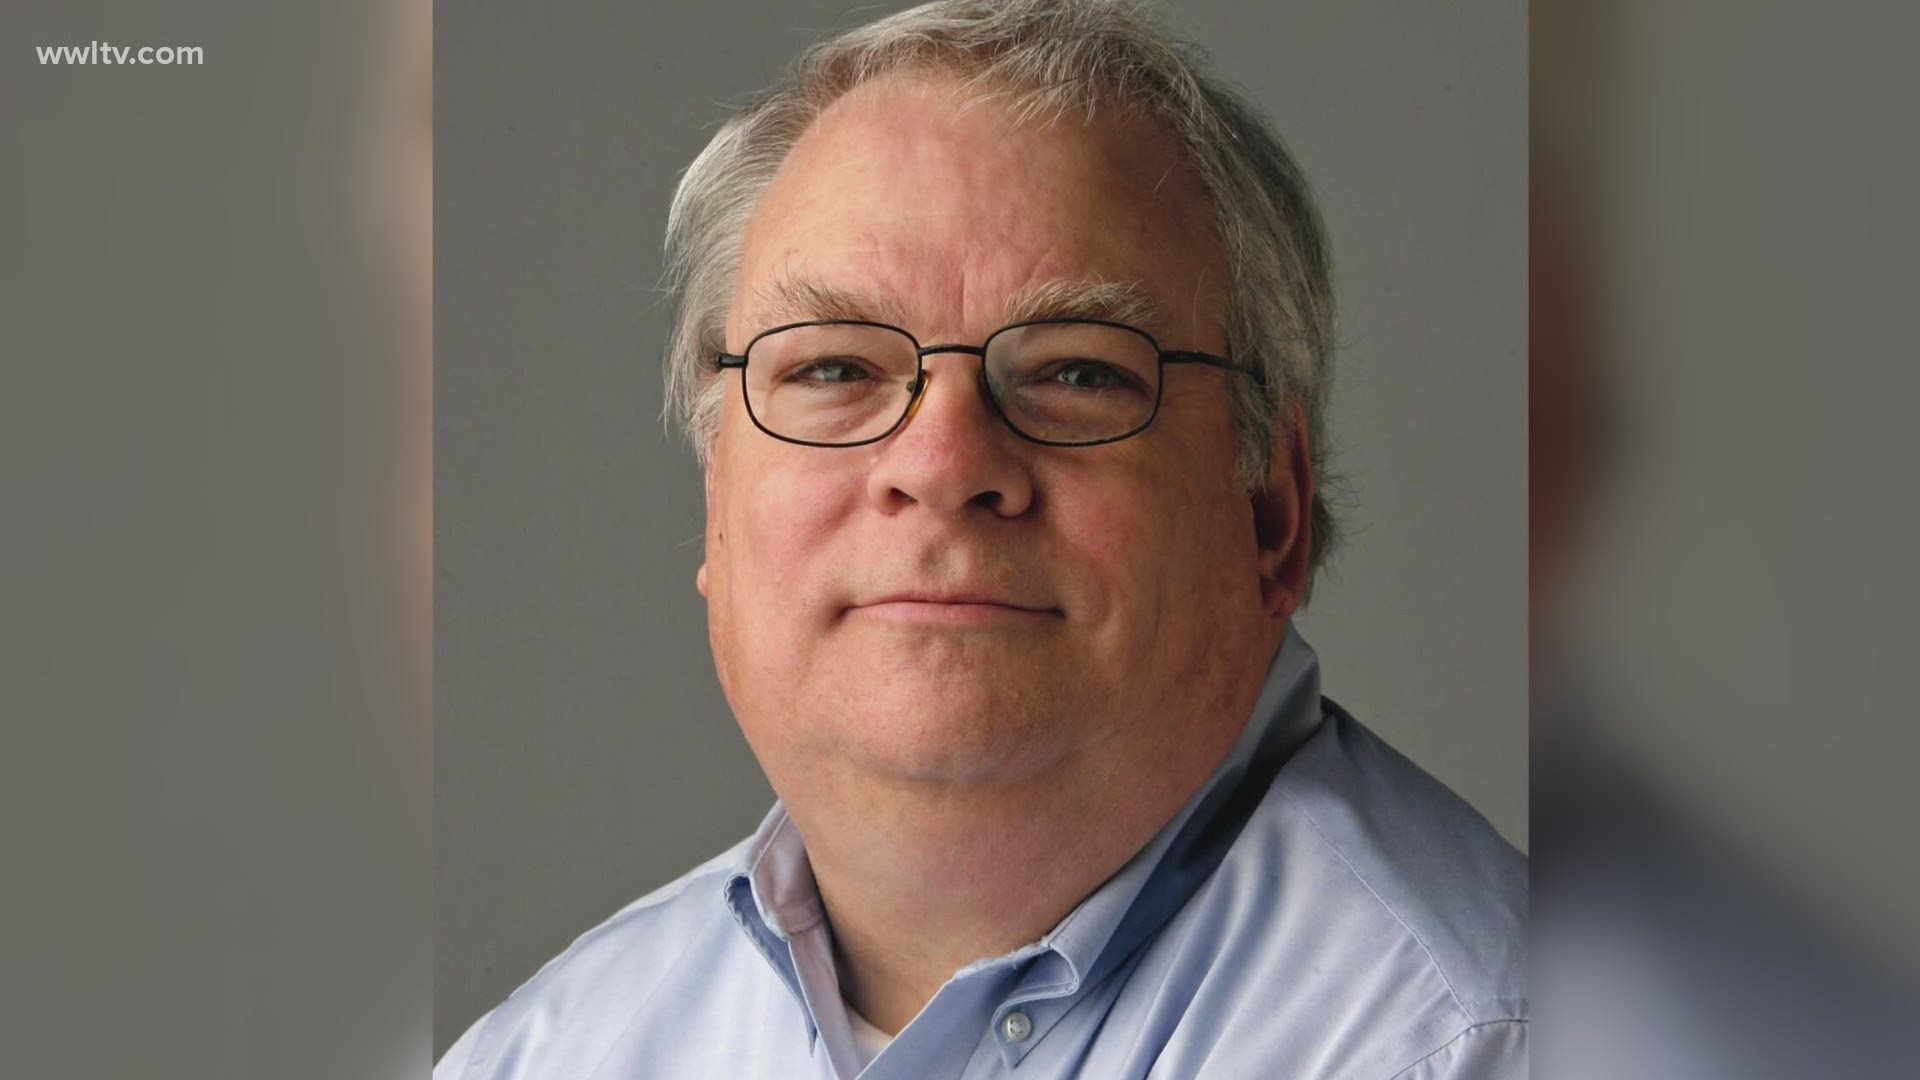 Bruce Eggler, a longtime reporter at the Times-Picayune & New Orleans Advocate newspapers, died Wednesday, Sept. 9. He was 76.